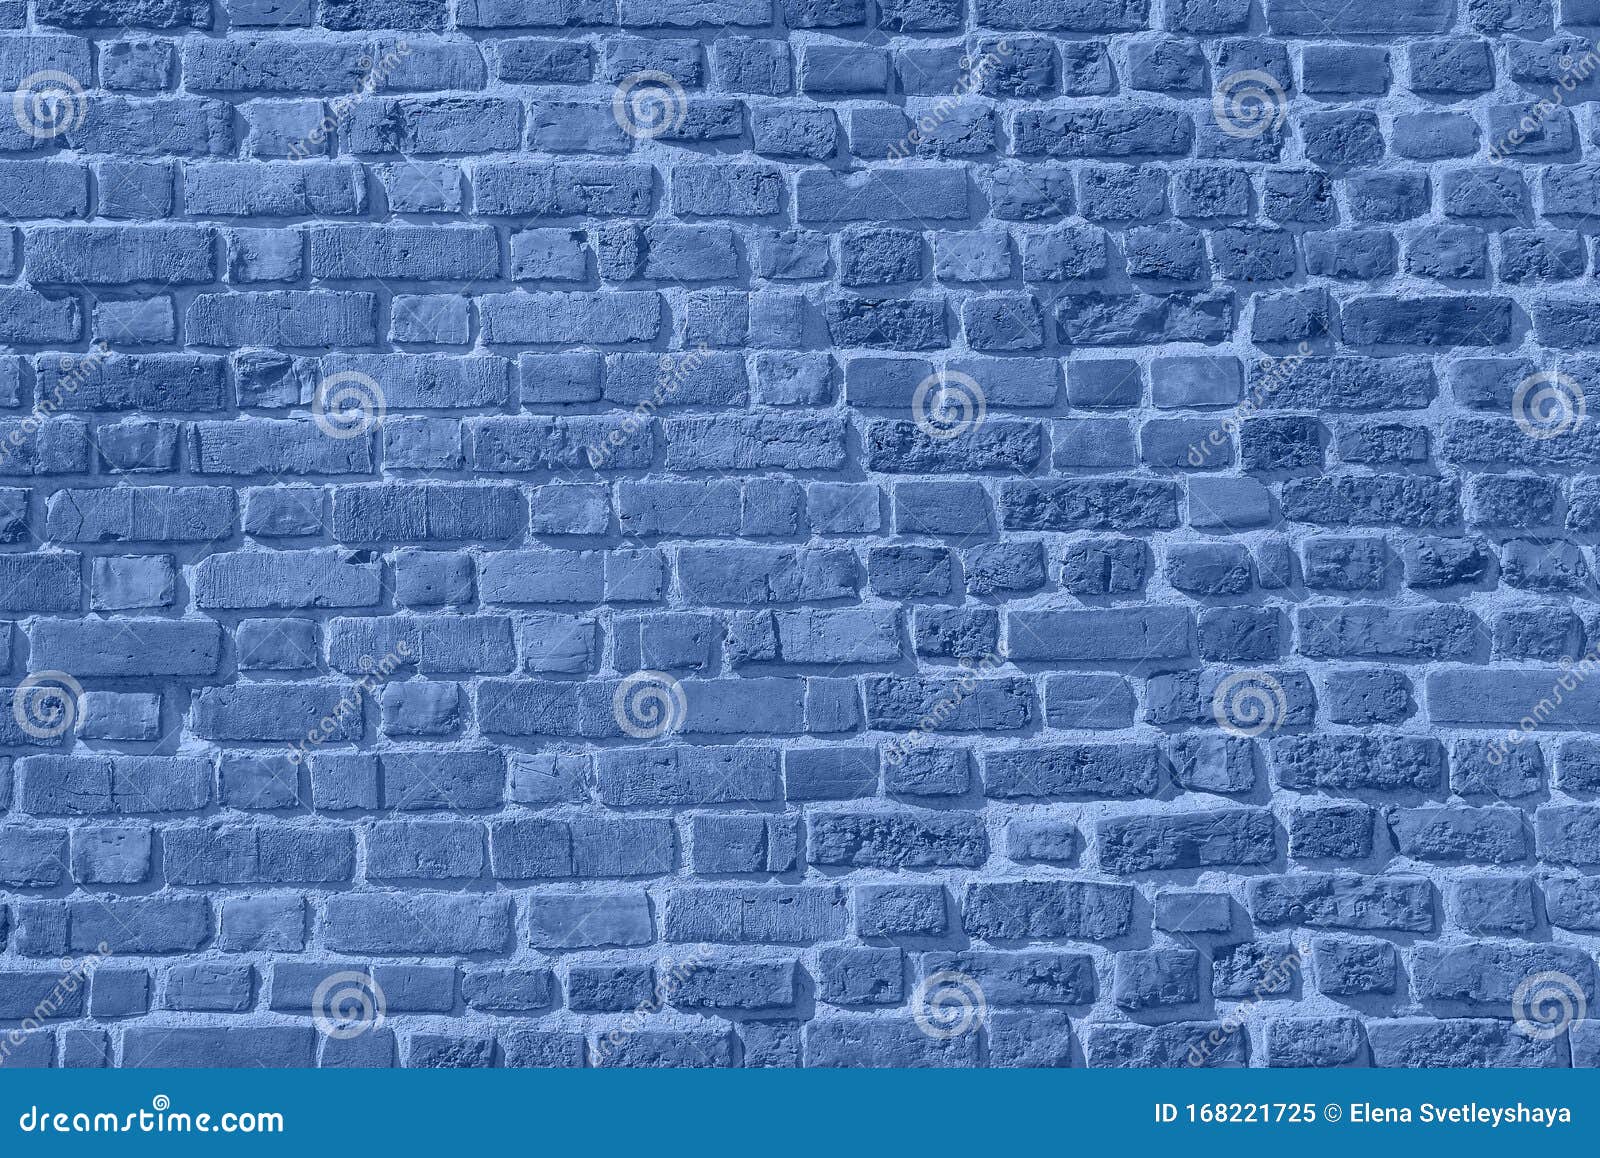 Blue brick wall textured background  free image by rawpixelcom  Ake   Chim  Brick wall Brick wall texture Brick wall background